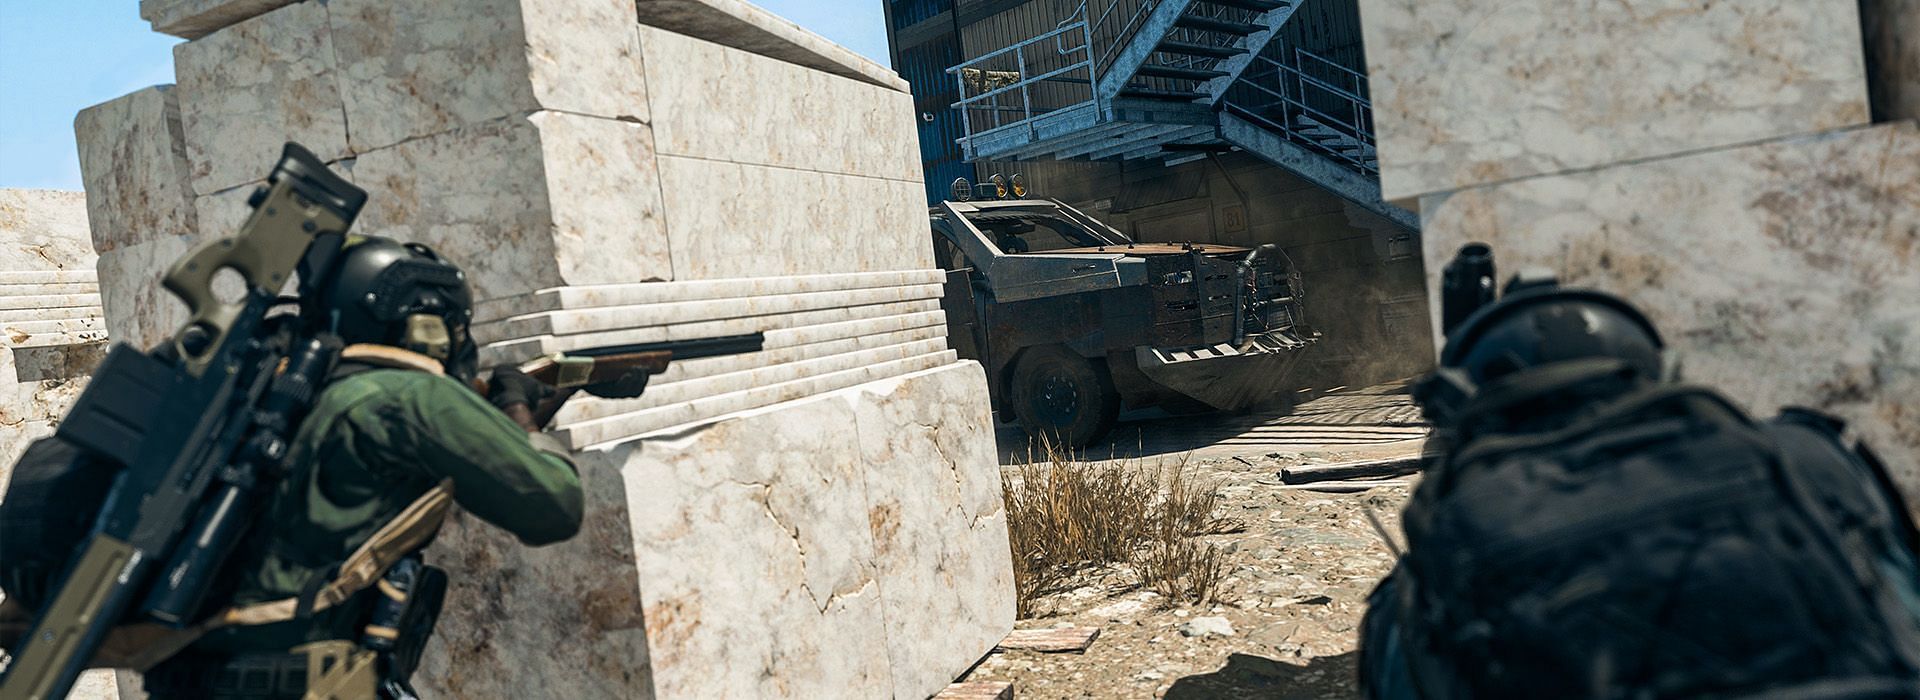 Warzone 2 will feature new vehicle durability system (Image via Activision)